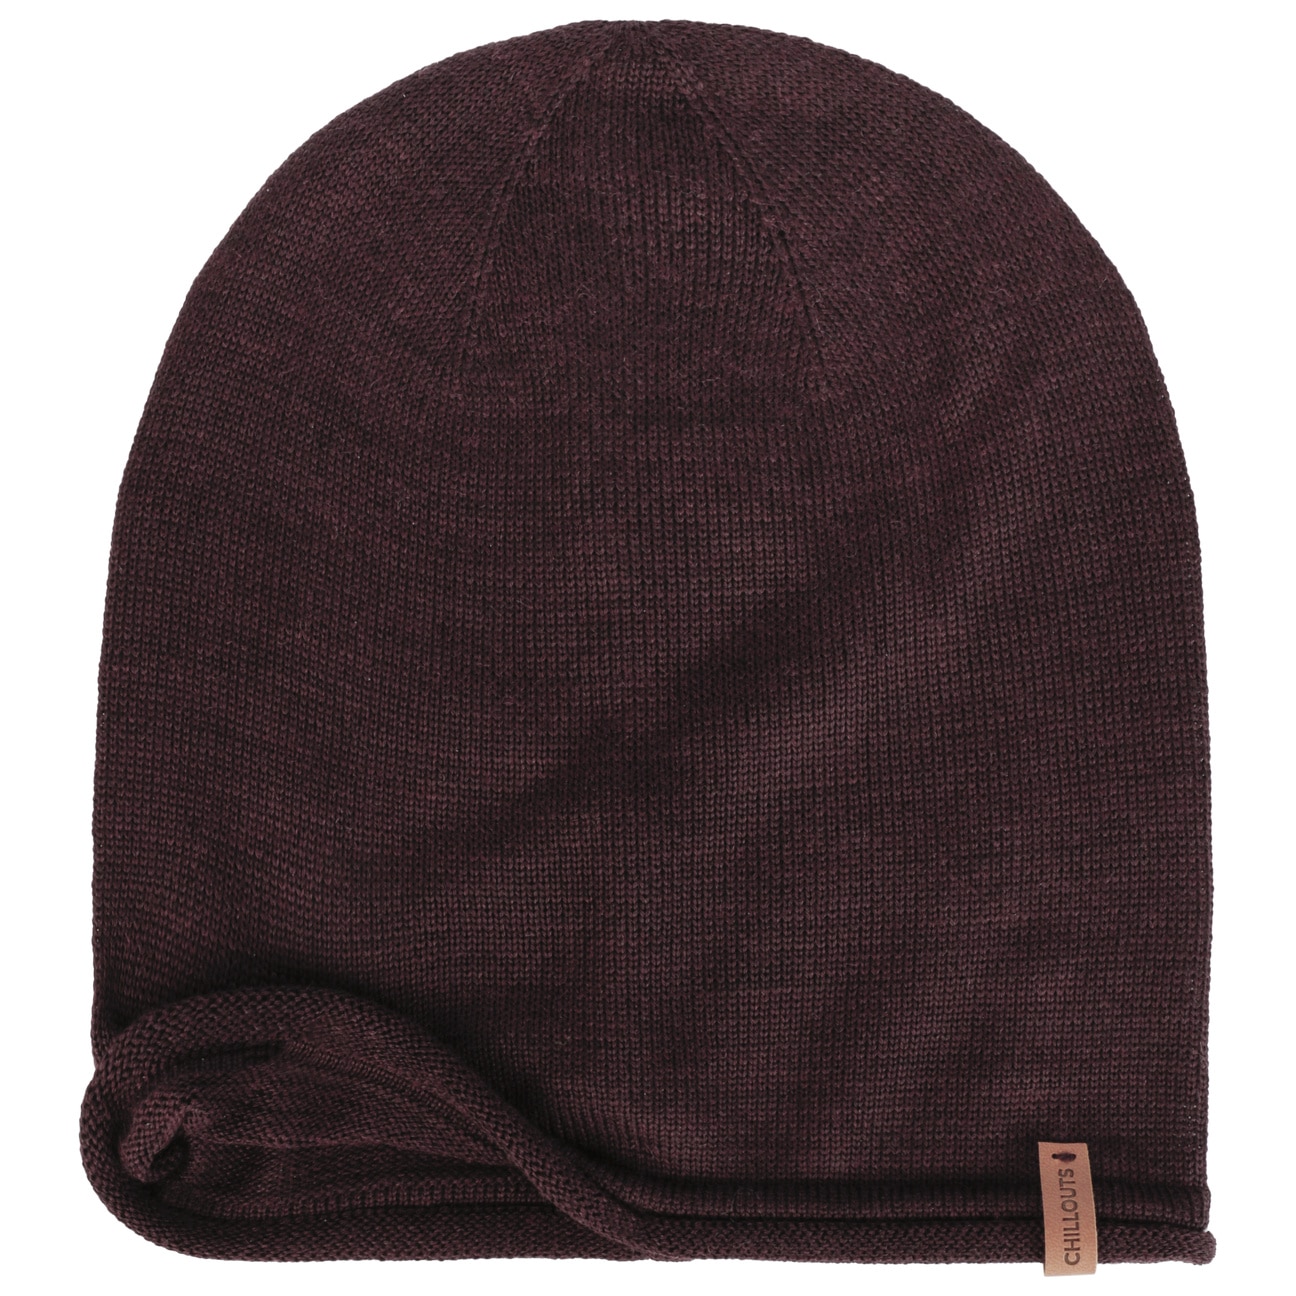 Berretto Beanie Chillouts Leicester € 27,99 by 